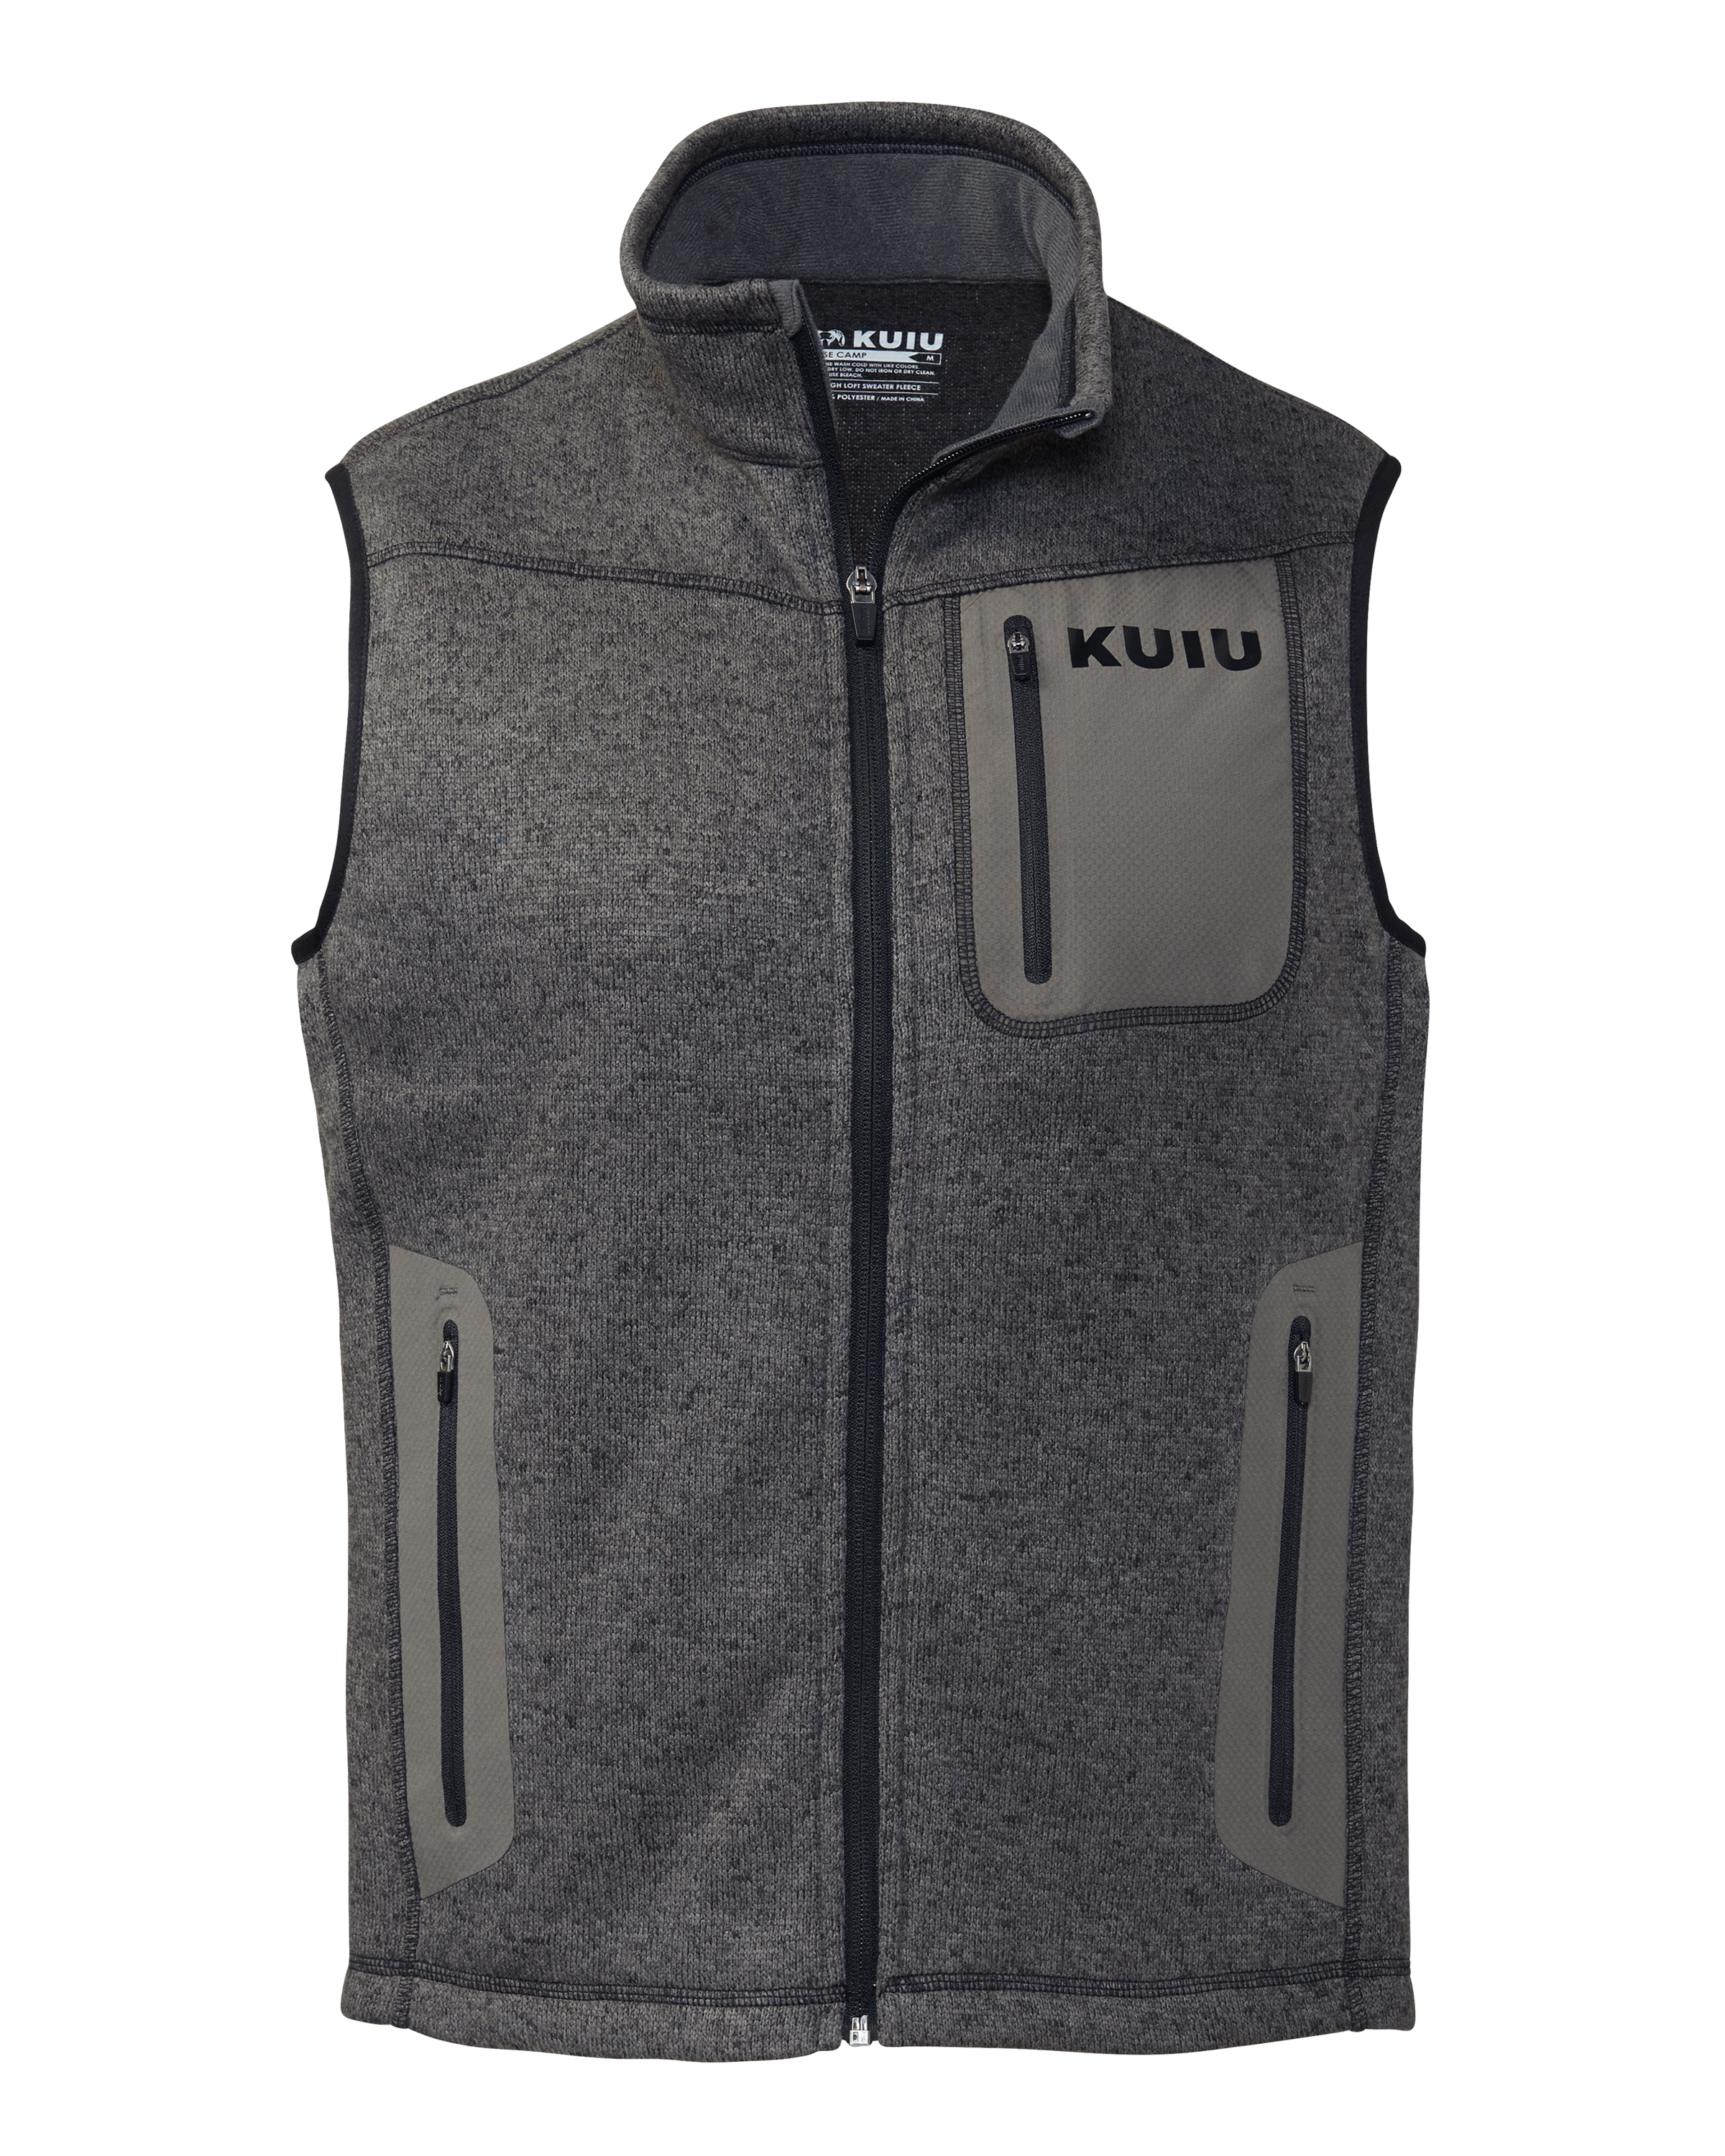 KUIU Base Camp Sweater Vest in Charcoal | Size 3XL